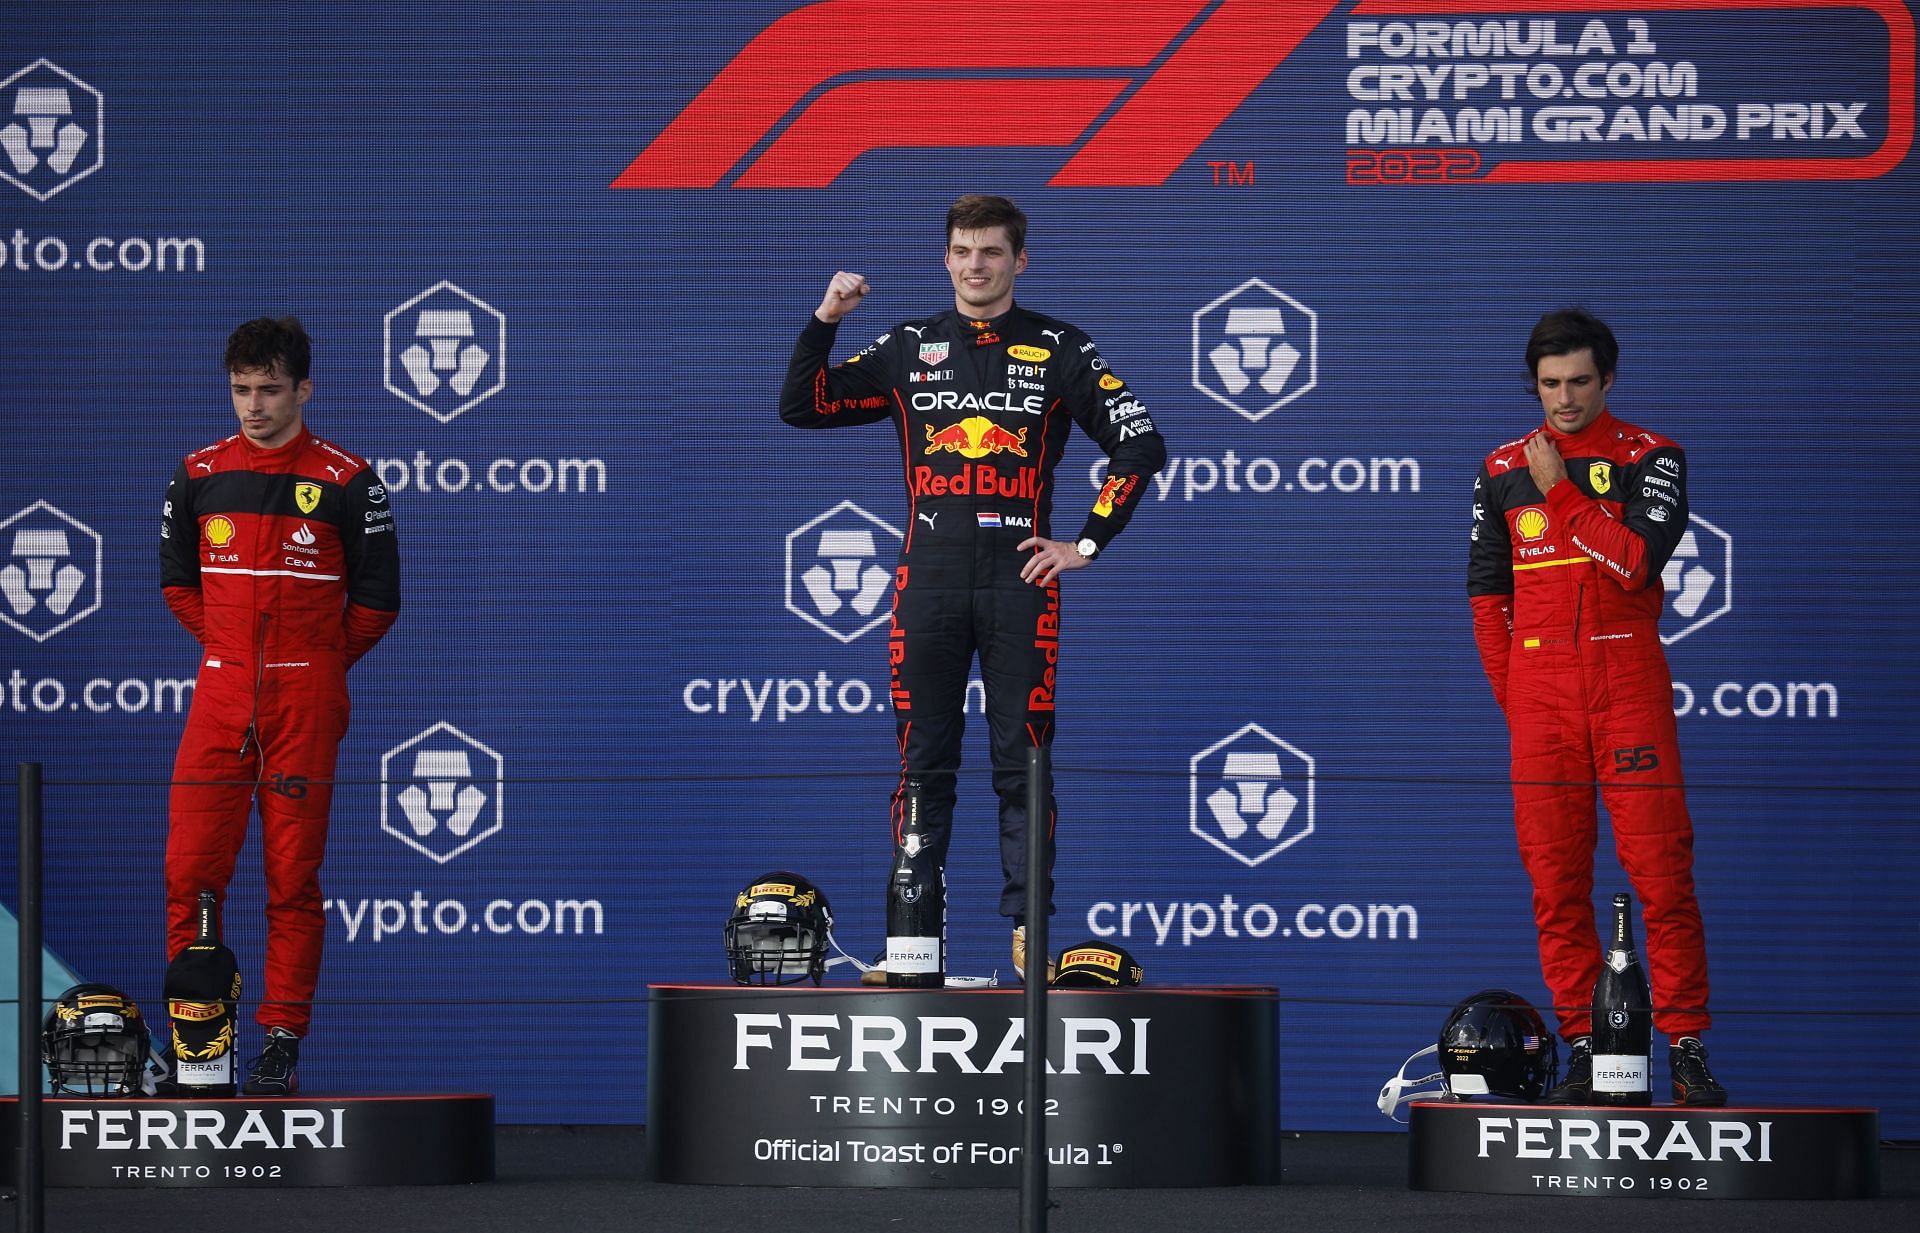 Max Verstappen closed down the gap to Charles Leclerc to less than 20 points in the championship